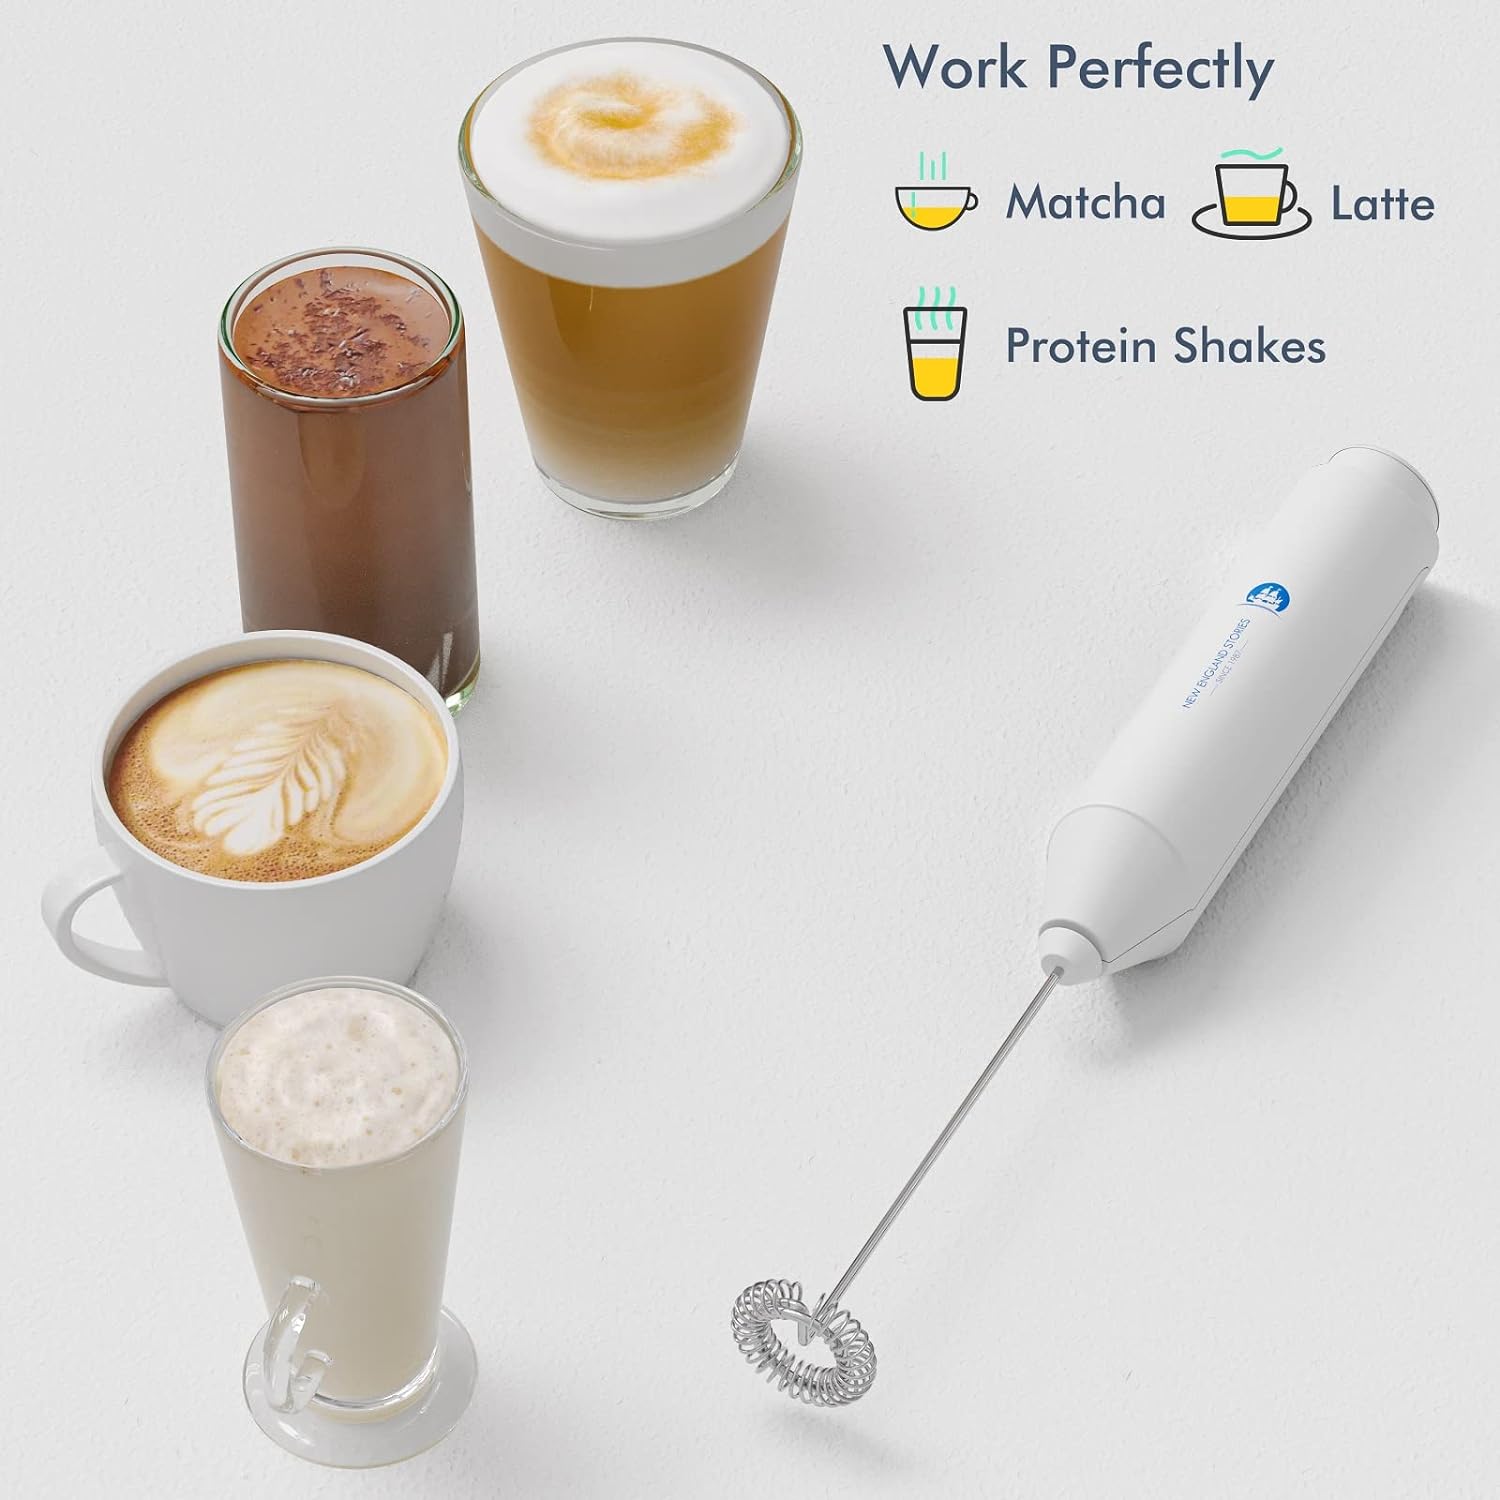 Powerful Milk Frother Handheld Foam Maker, Mini Whisk Drink Mixer for Coffee, Cappuccino, Latte, Matcha, Hot Chocolate, With Stand, White